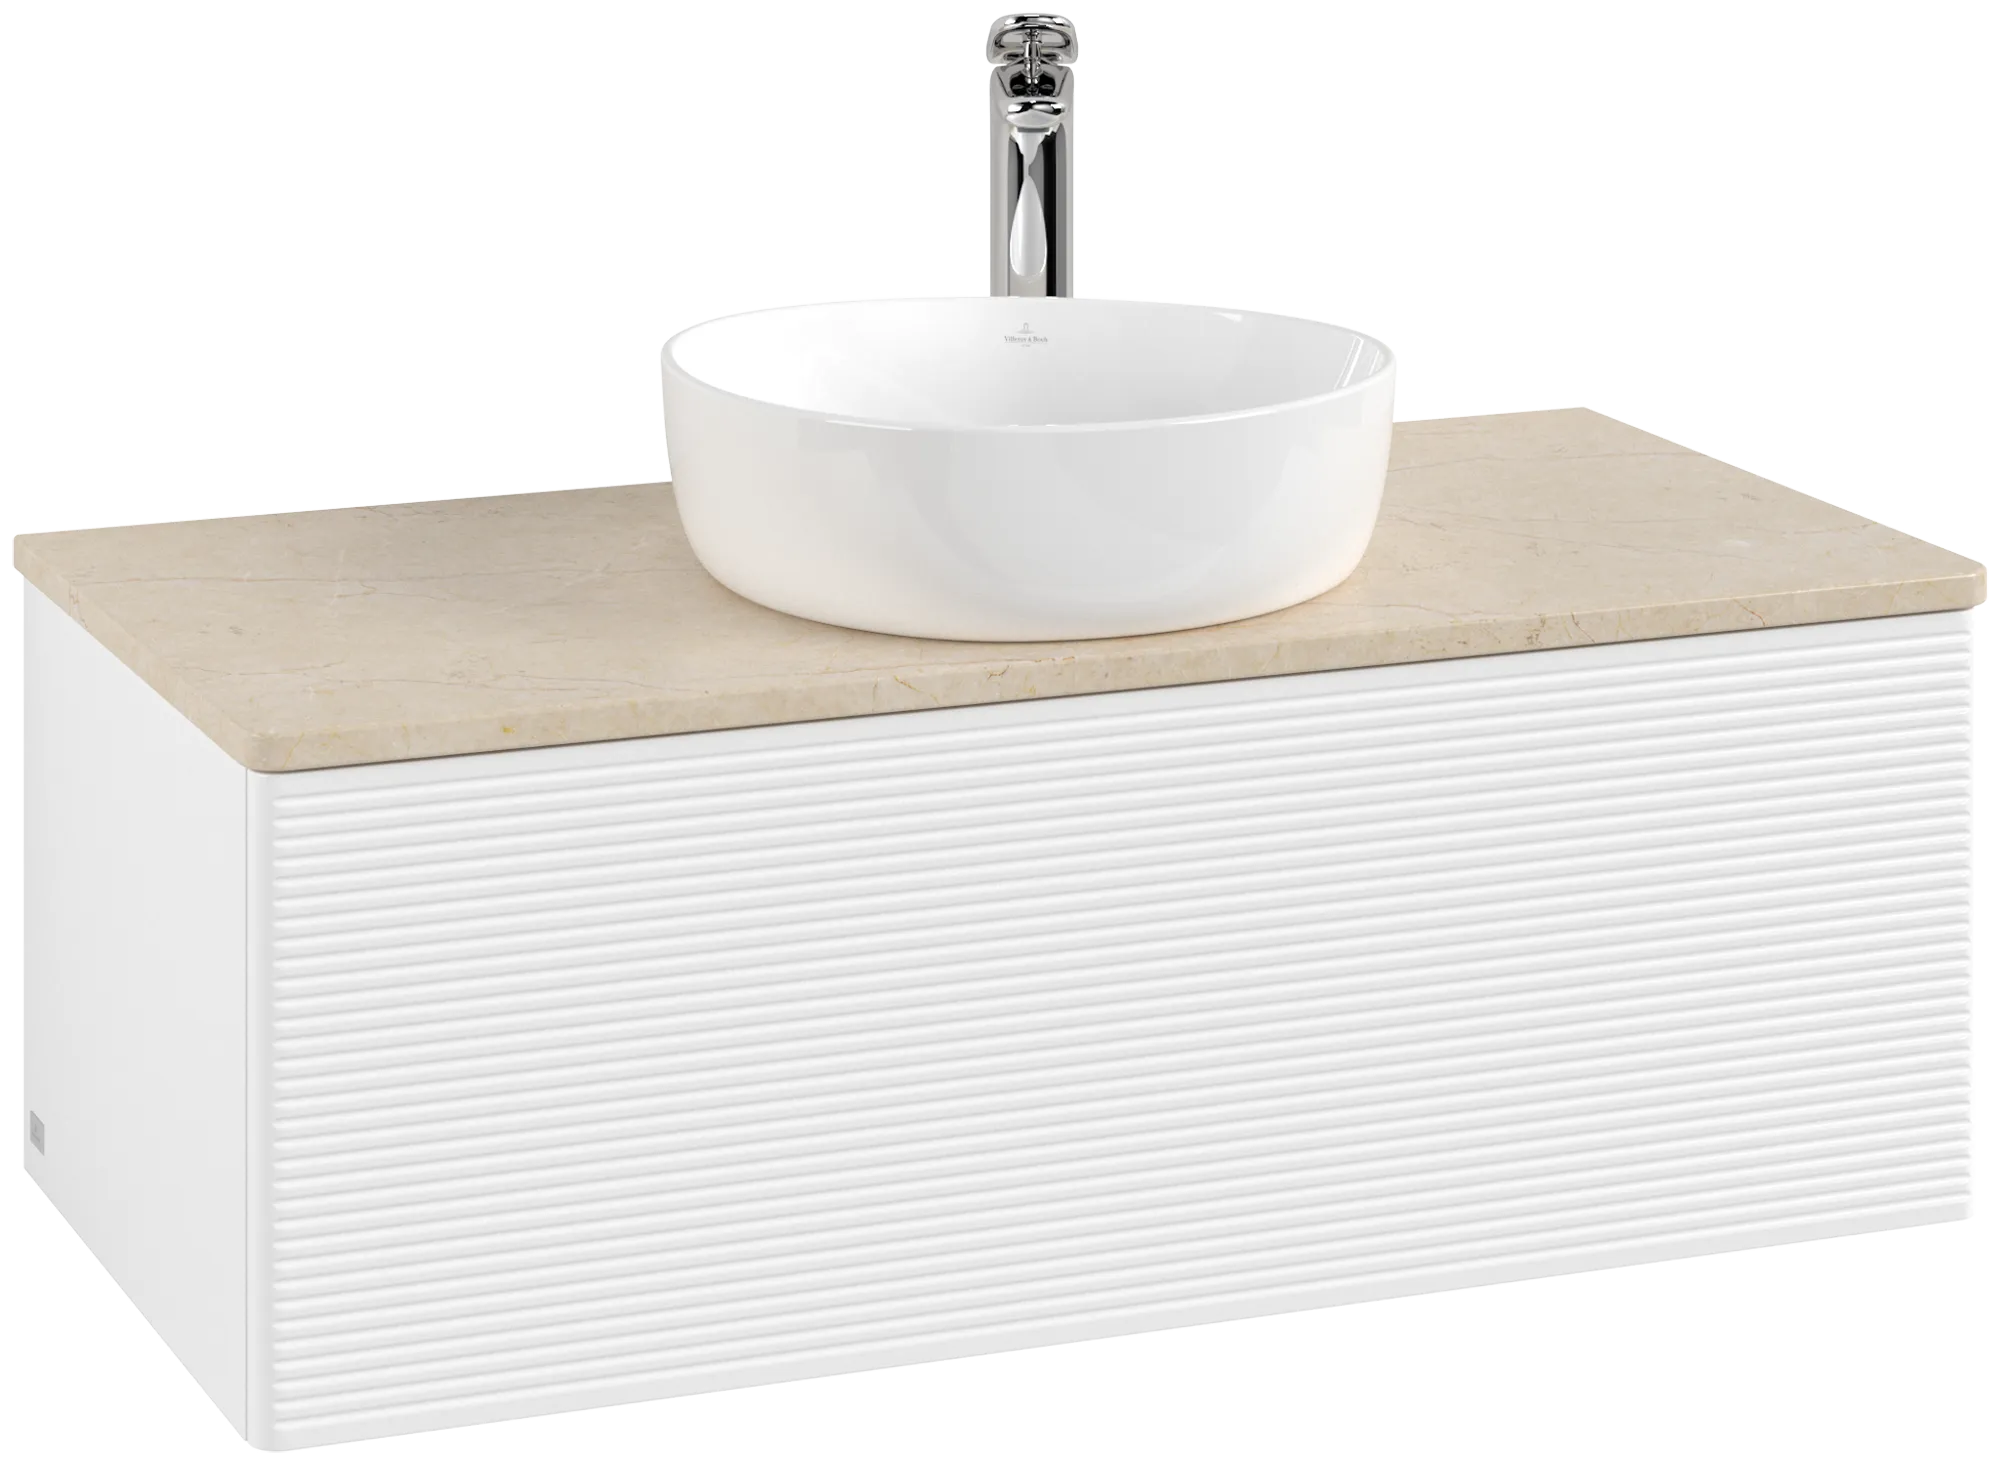 Picture of VILLEROY BOCH Antao Vanity unit, with lighting, 1 pull-out compartment, 1000 x 360 x 500 mm, Front with grain texture, White Matt Lacquer / Botticino #L31153MT